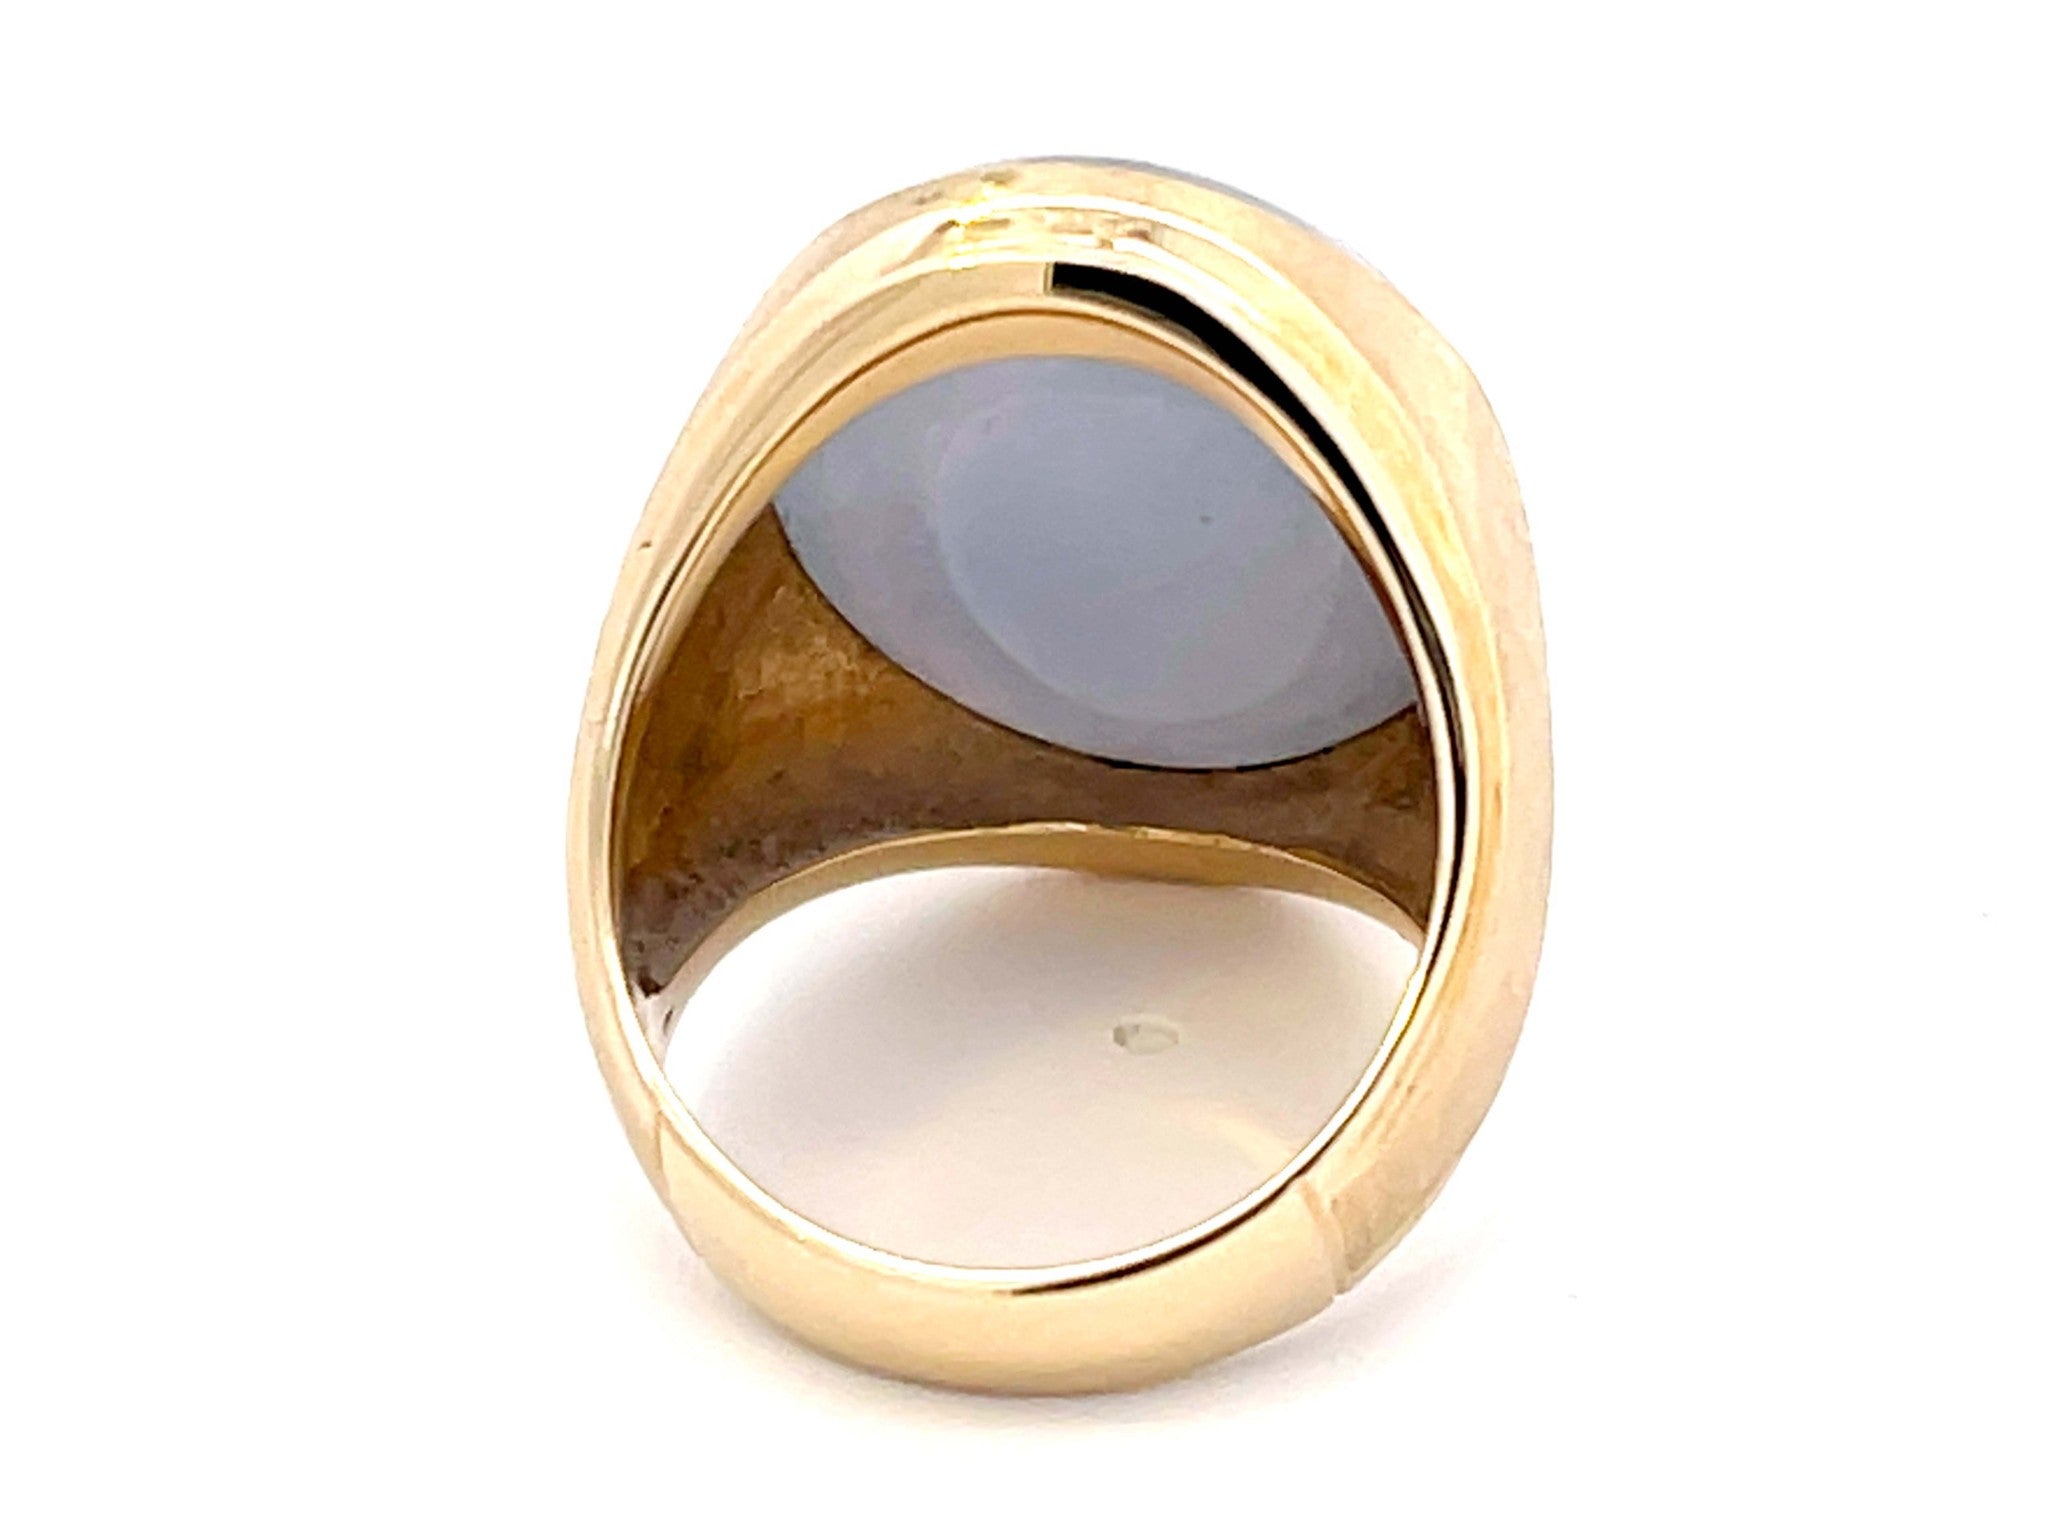 Lavender Oval Cabochon Jade Ring with Satin Finish in 14k Yellow Gold